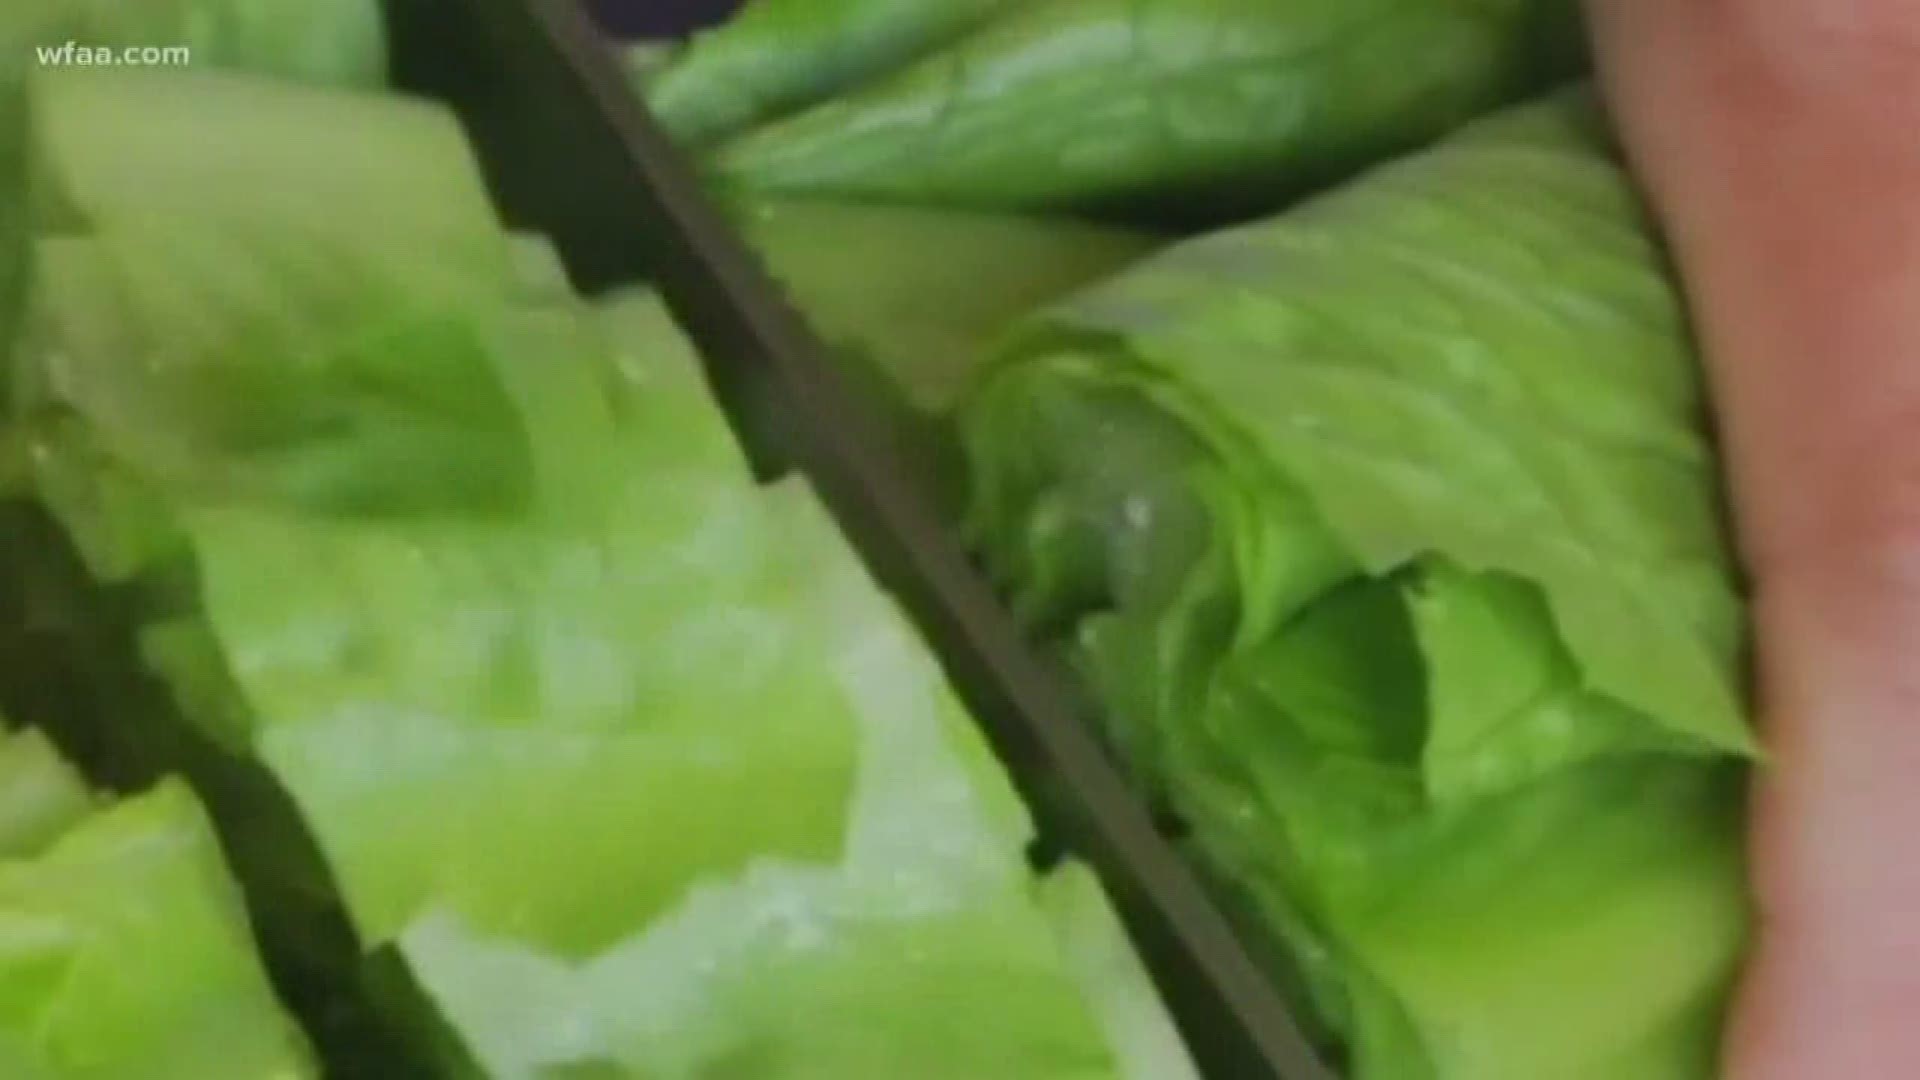 Officials are urging Americans not to eat romaine lettuce if the label doesn’t say where it was grown.